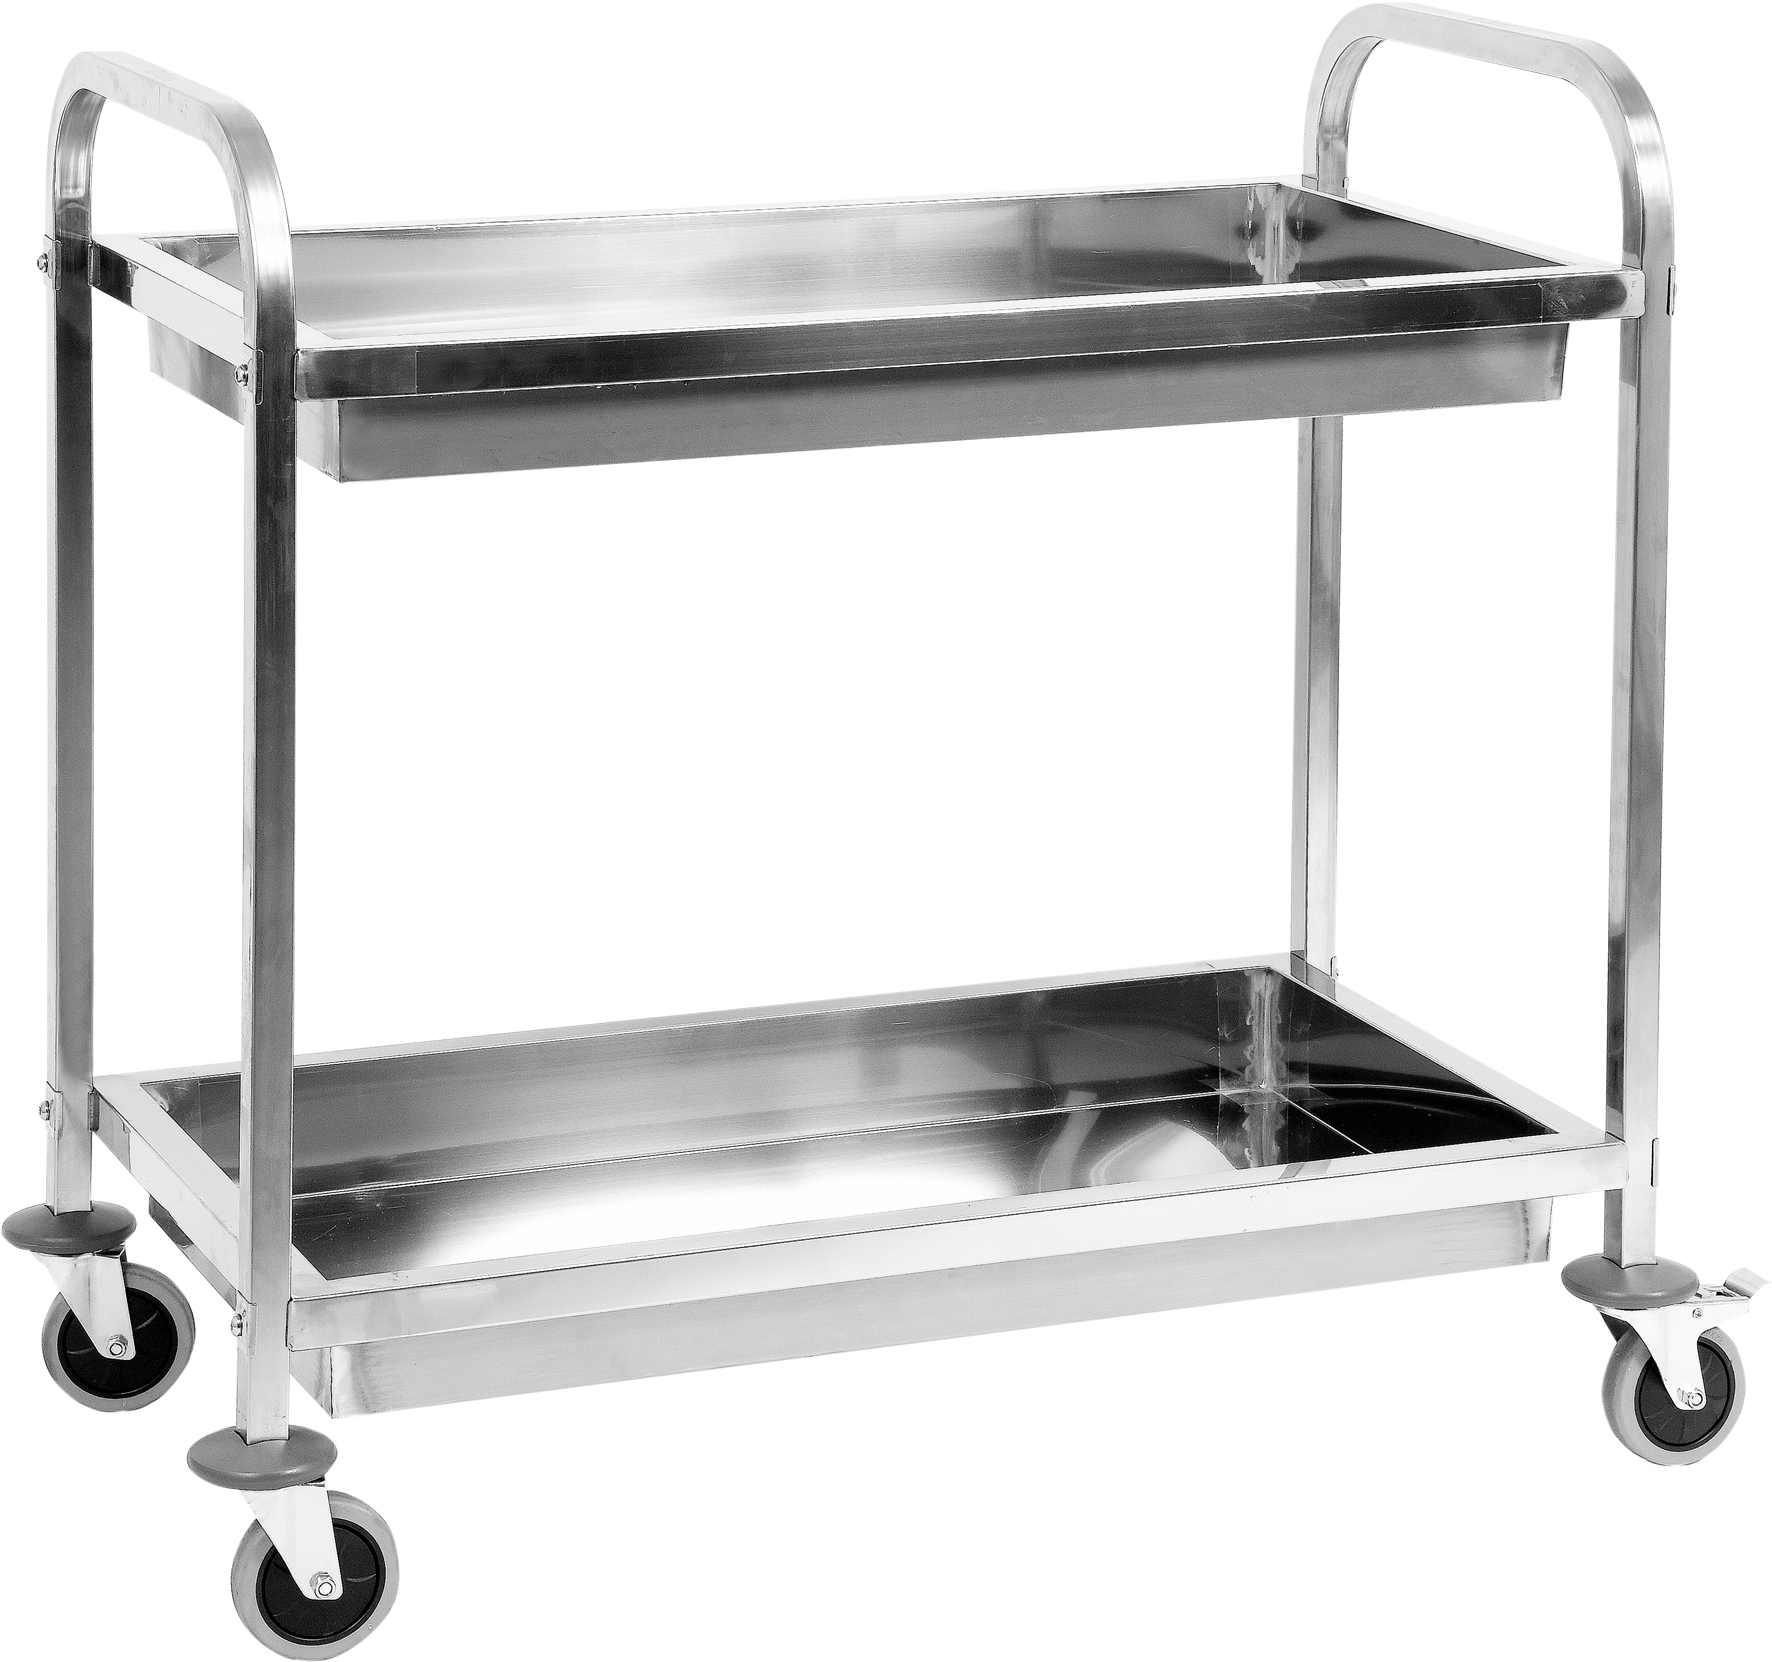 Stainless steel trolley with 2 shelves built up (YG-09099)